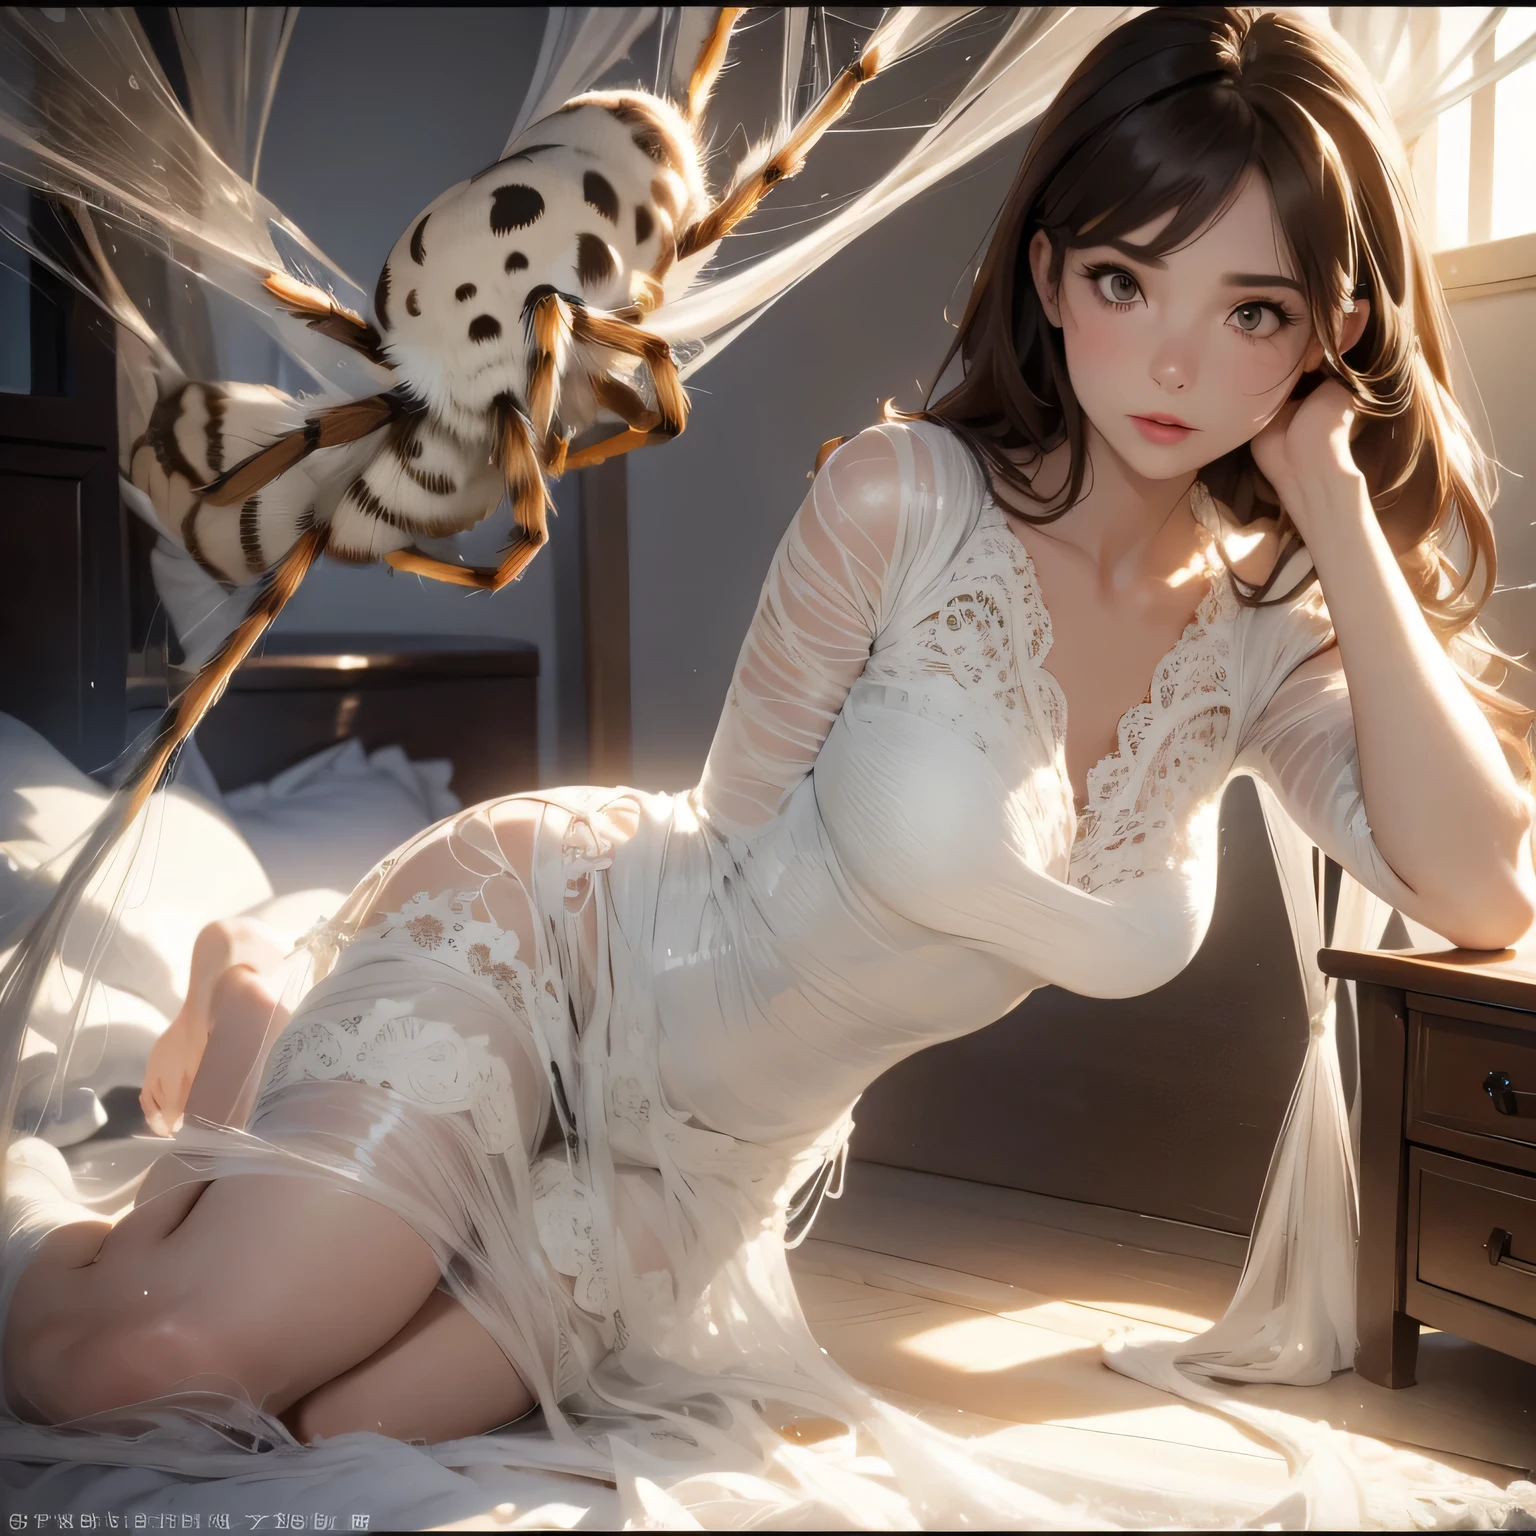 1girl,Spider weaving a net on the girl,réalism:1.2,ultra-detailed,bedroom setting,stretched pose,struggling in the net,brown haired,very long sheer skirt,oaken floor,soft sunlight,delicate spider silk,lace curtains,bedside table,decorative pillows